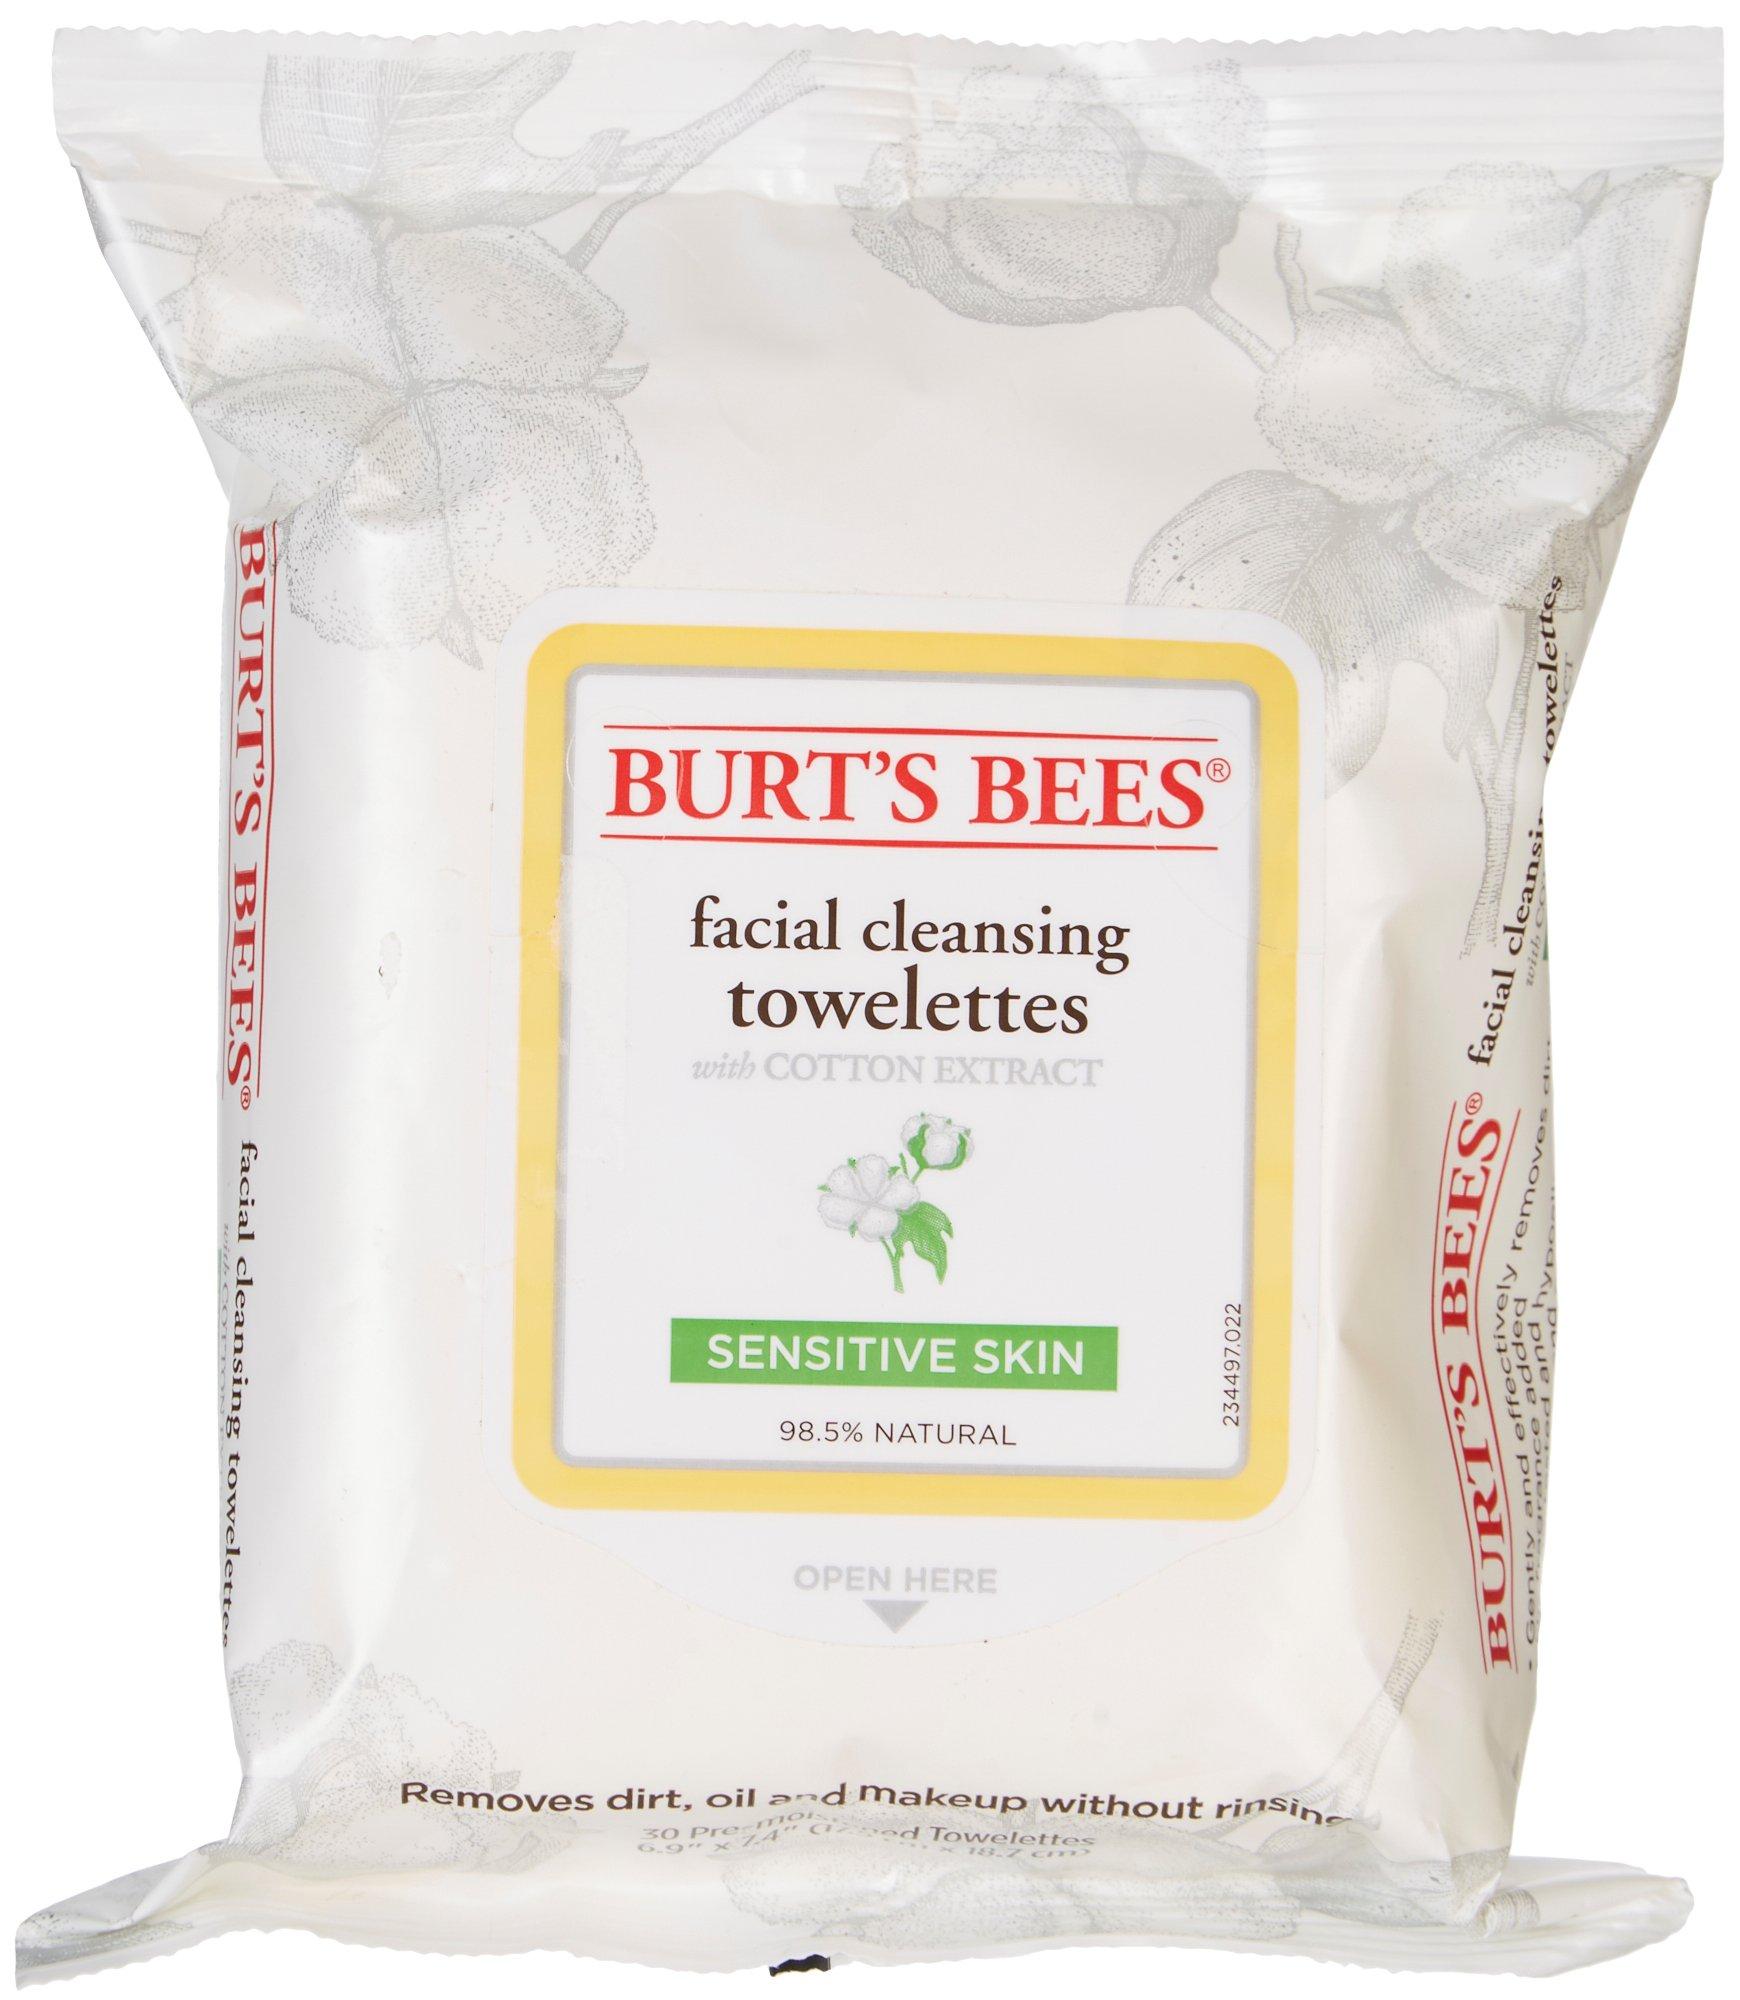 Burt's Bees Cotton Extract Facial Cleansing Towelettes